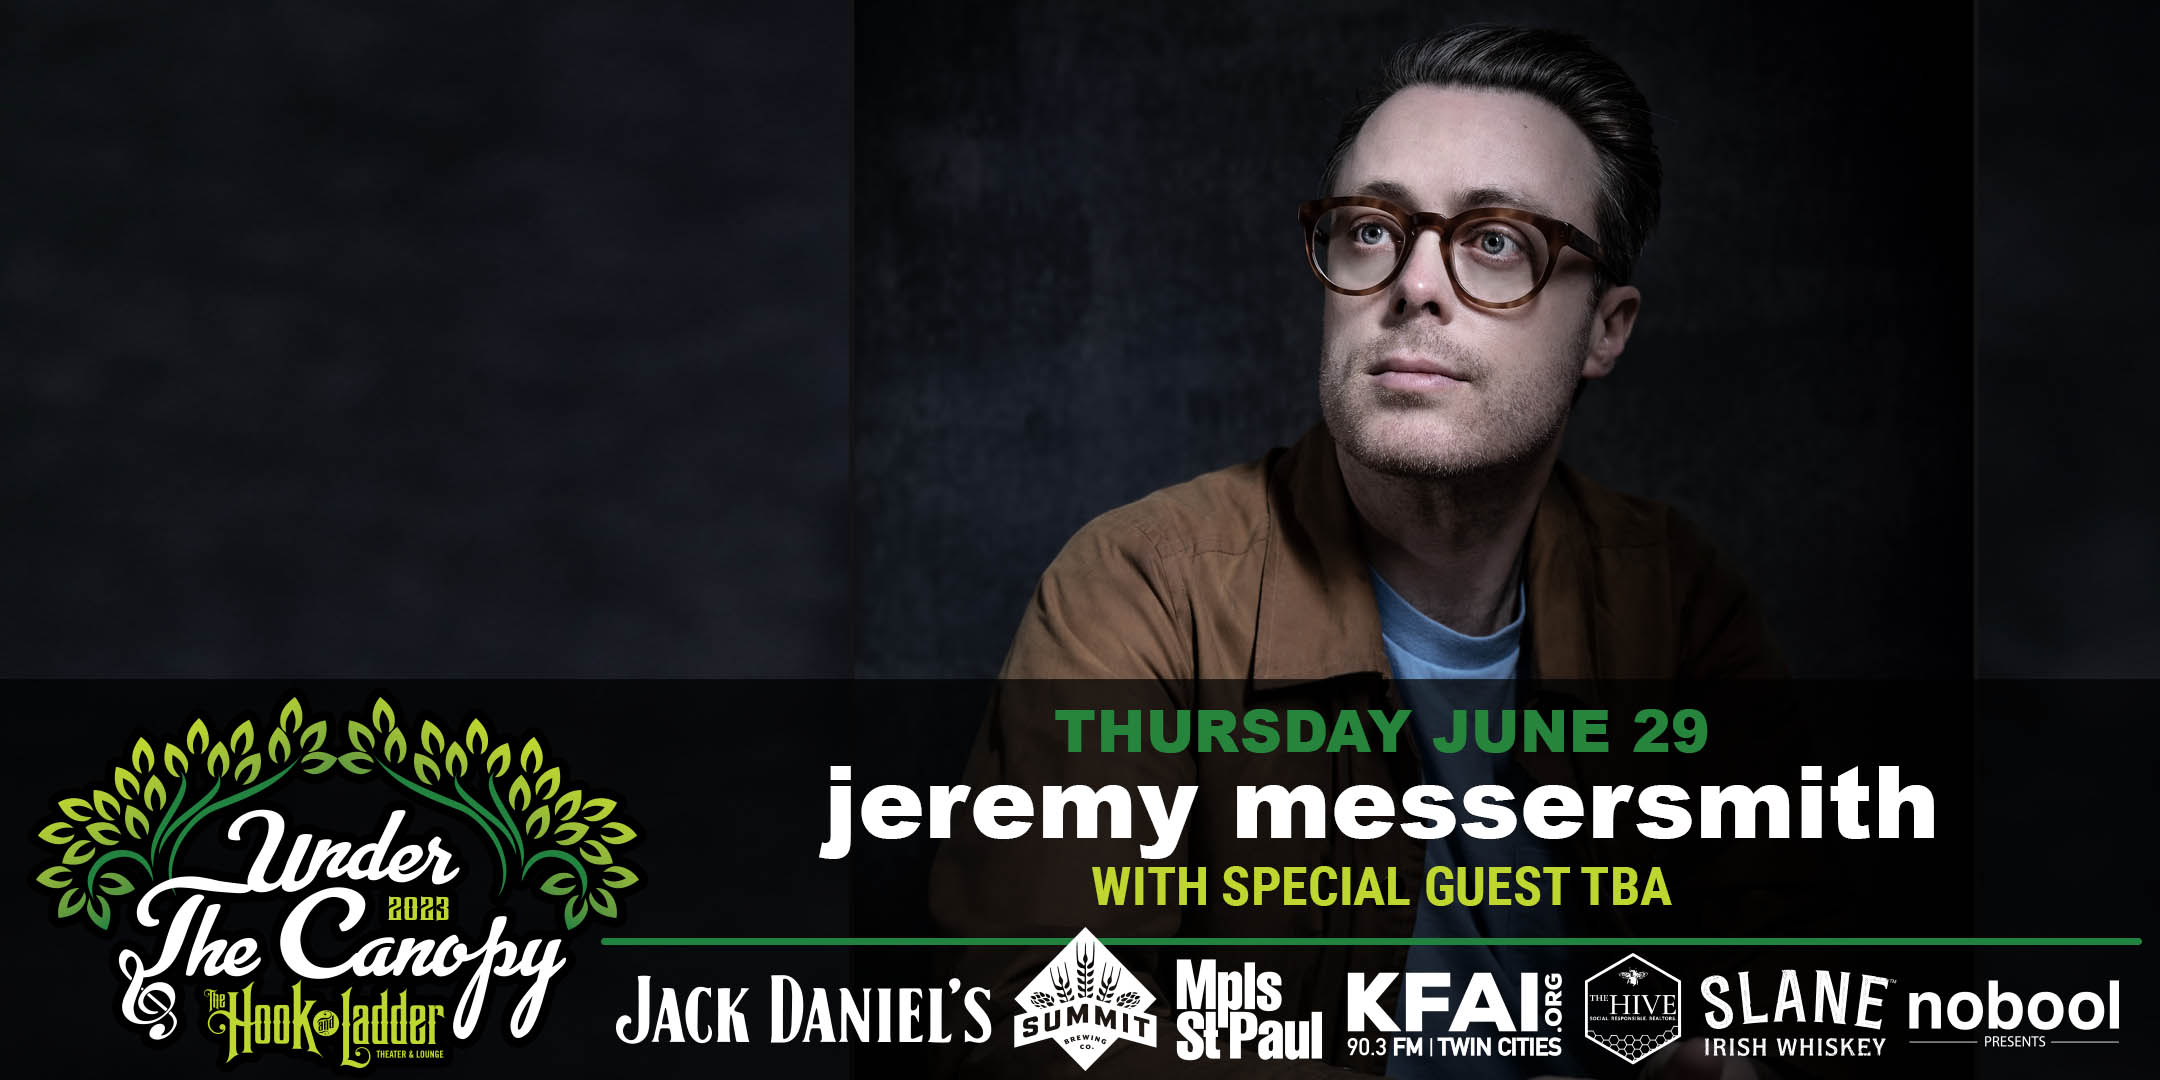 jeremy messersmith (Bri, lower case is right) with special guest TBA Thursday, June 29 Under The Canopy at The Hook and Ladder Theater "An Urban Outdoor Summer Concert Series" Doors 6:00pm :: Music 7:00pm :: 21+ Reserved Seats: $36 GA: $24 ADV / $30 DOS